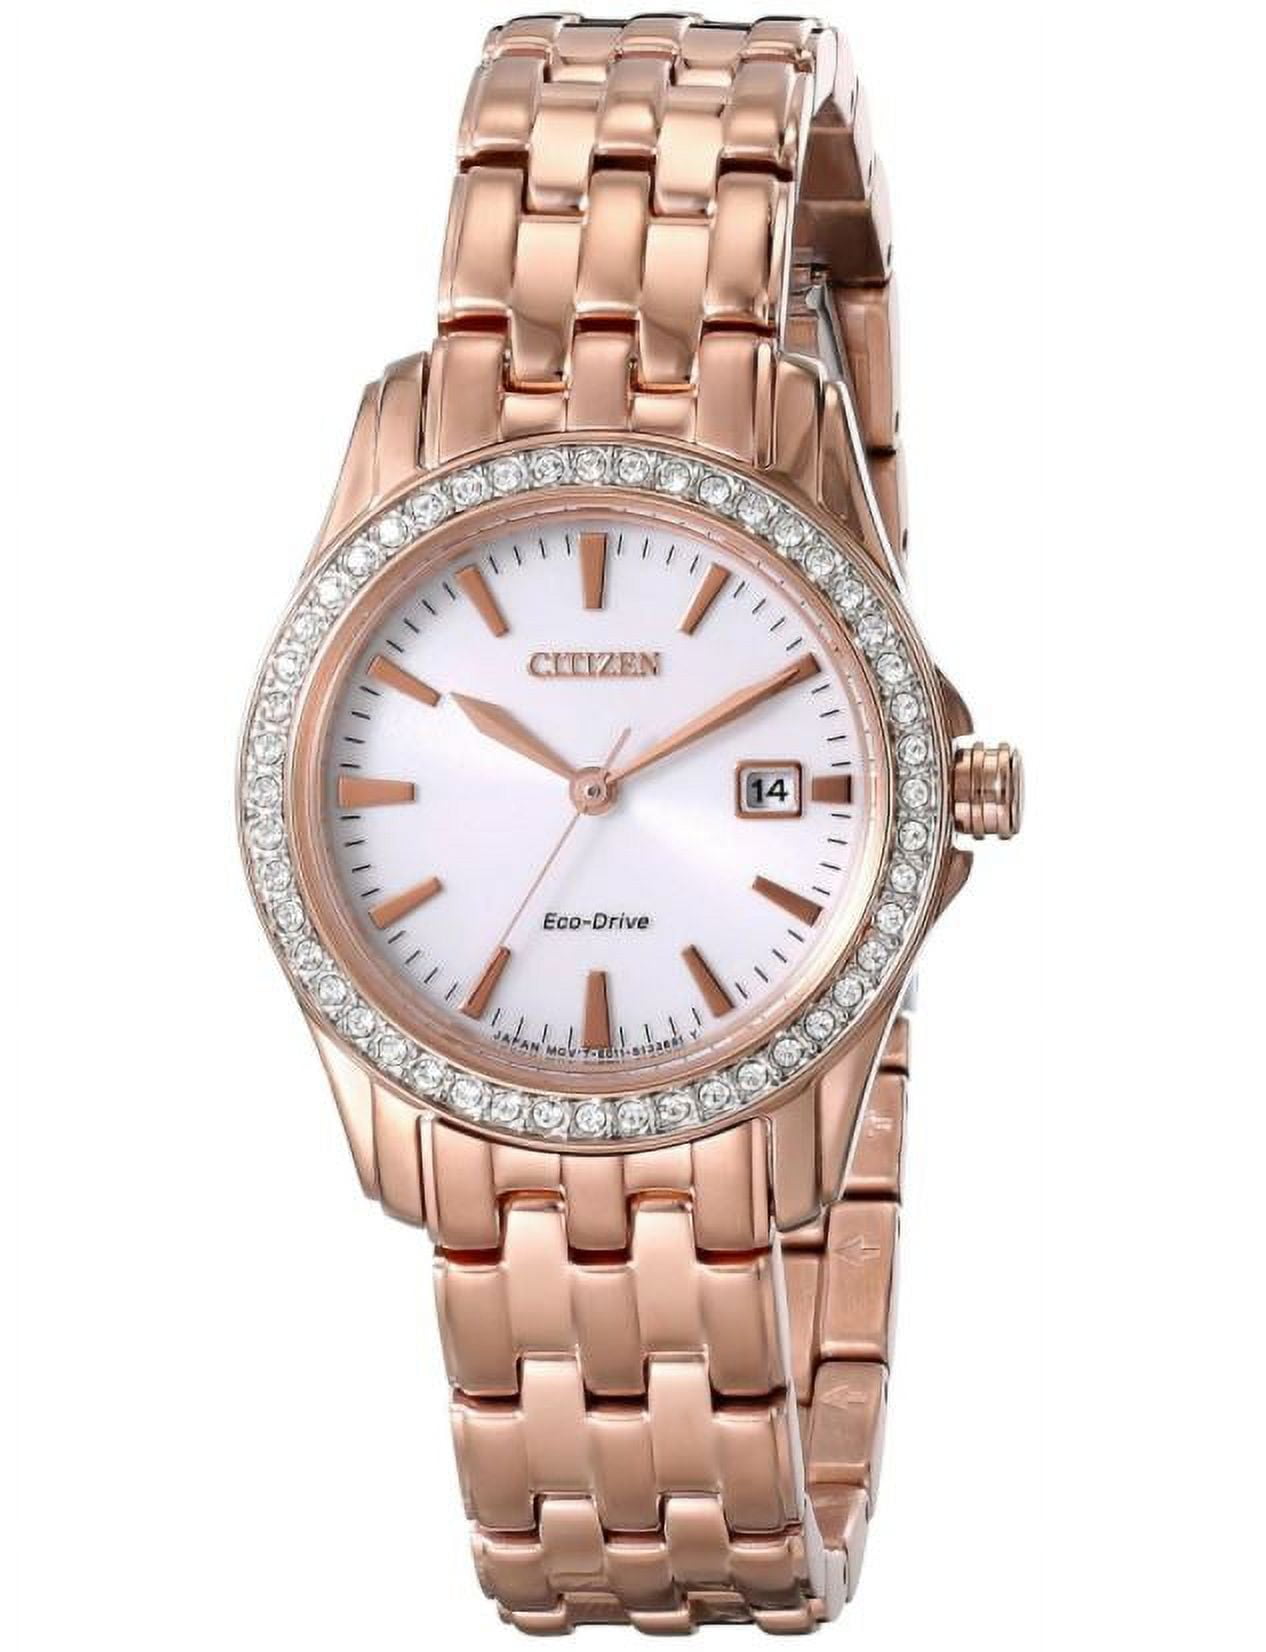 CITIZEN Women's Eco-Drive EW1903-52A Rose-Gold Stainless-Steel ...